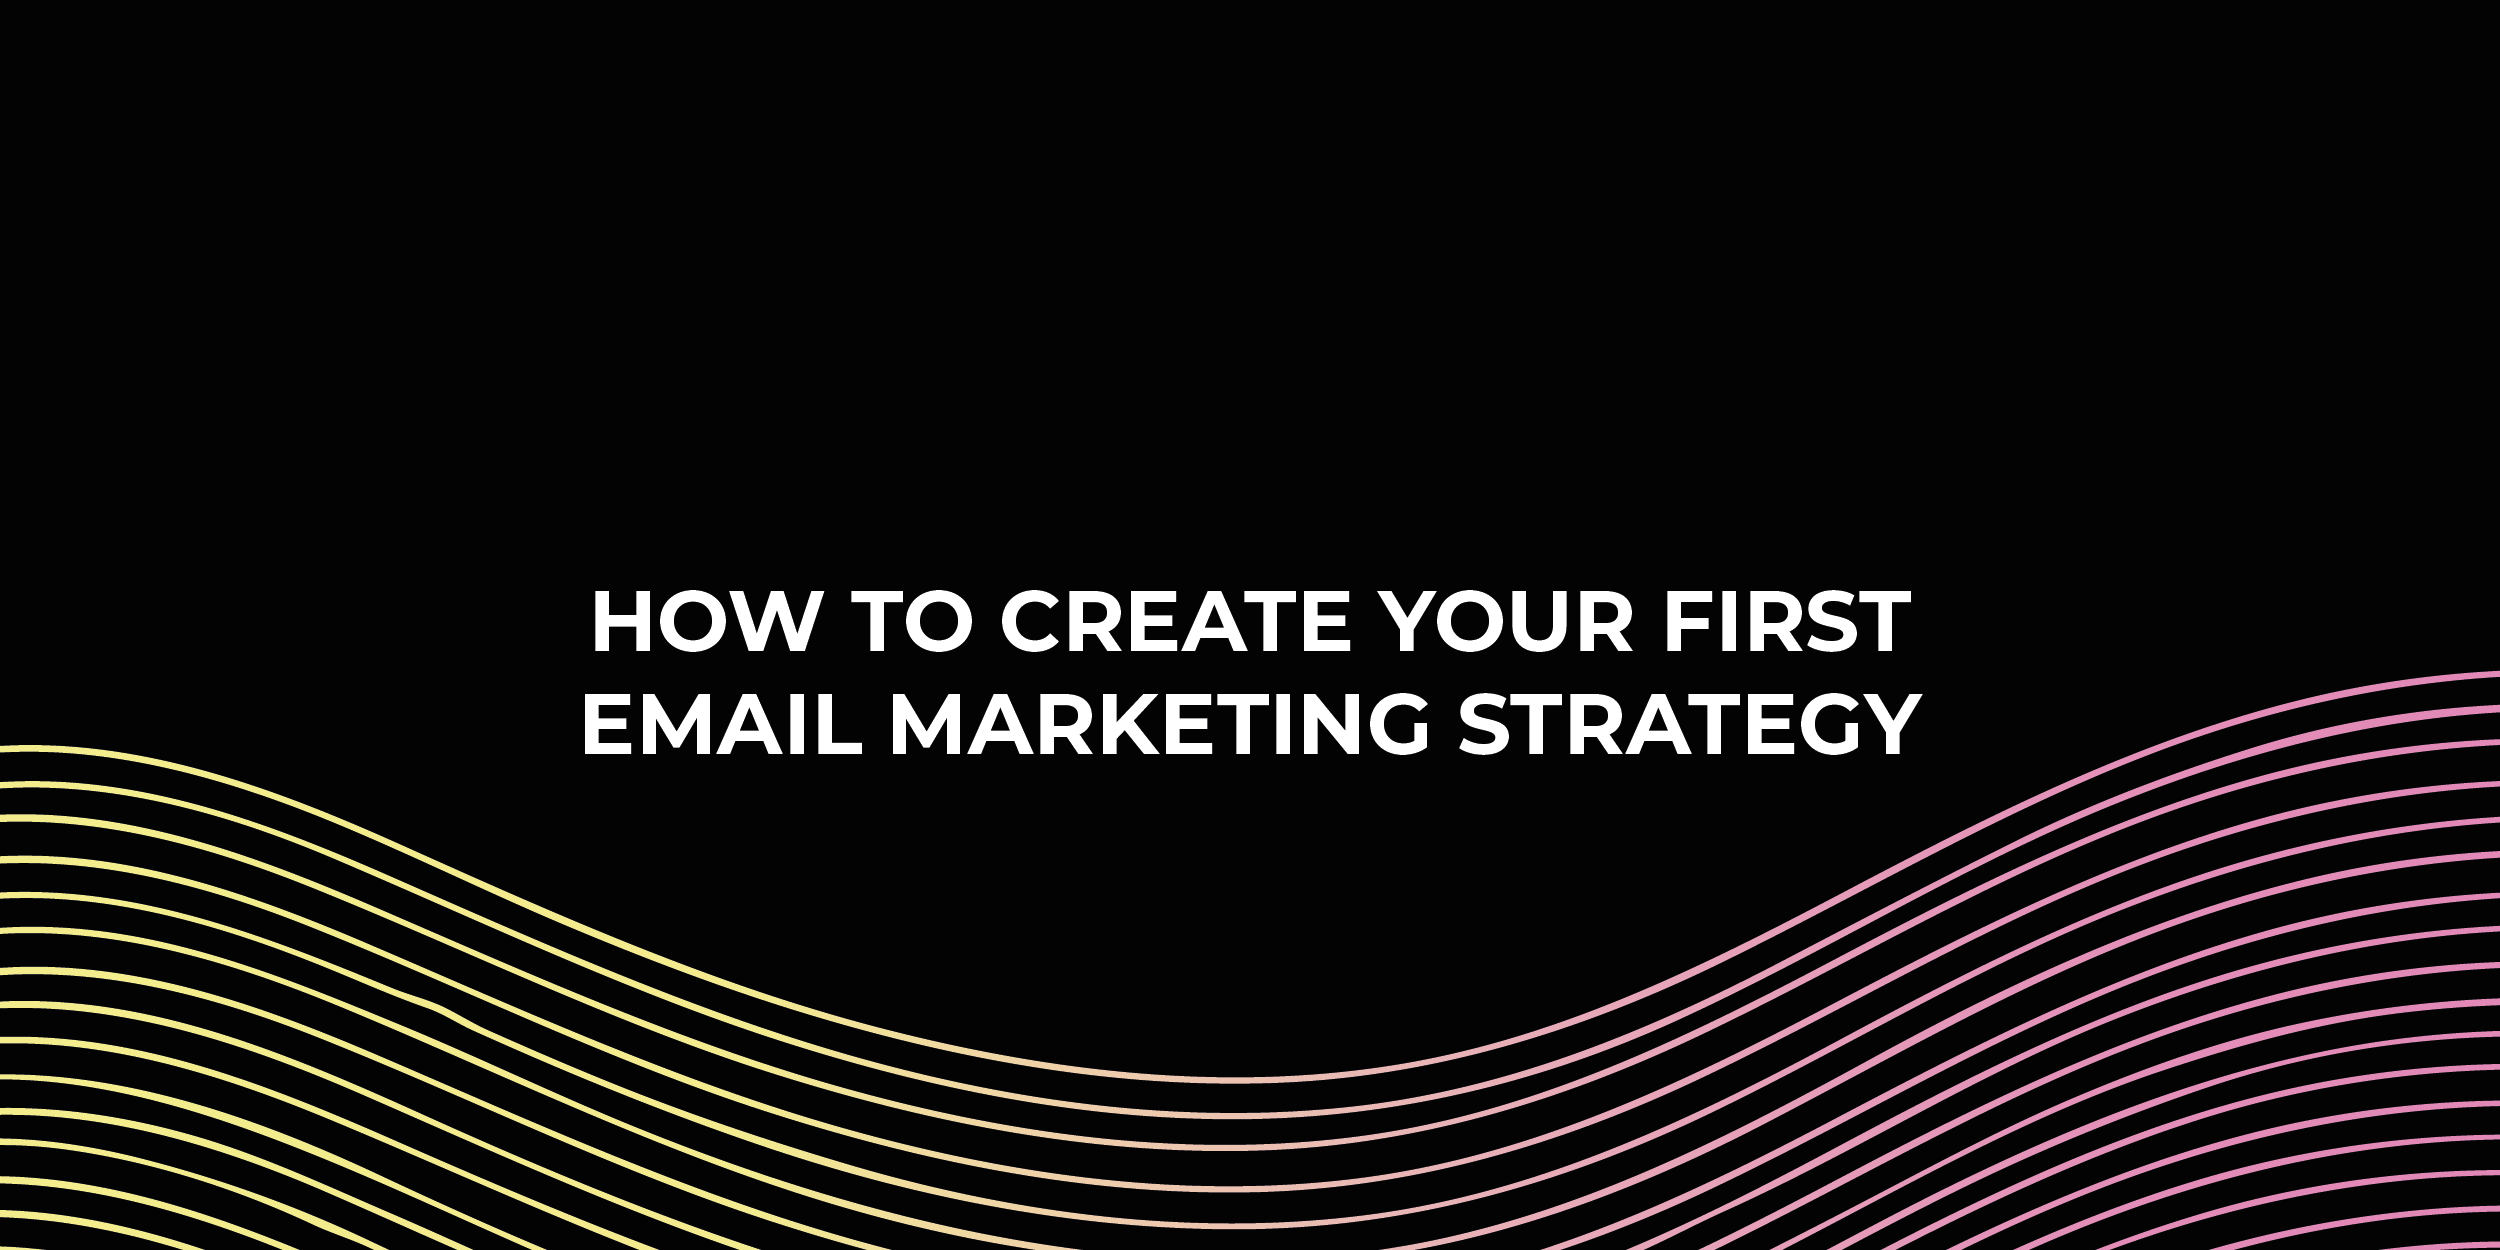 How to Create Your First Email Marketing Strategy Successfully